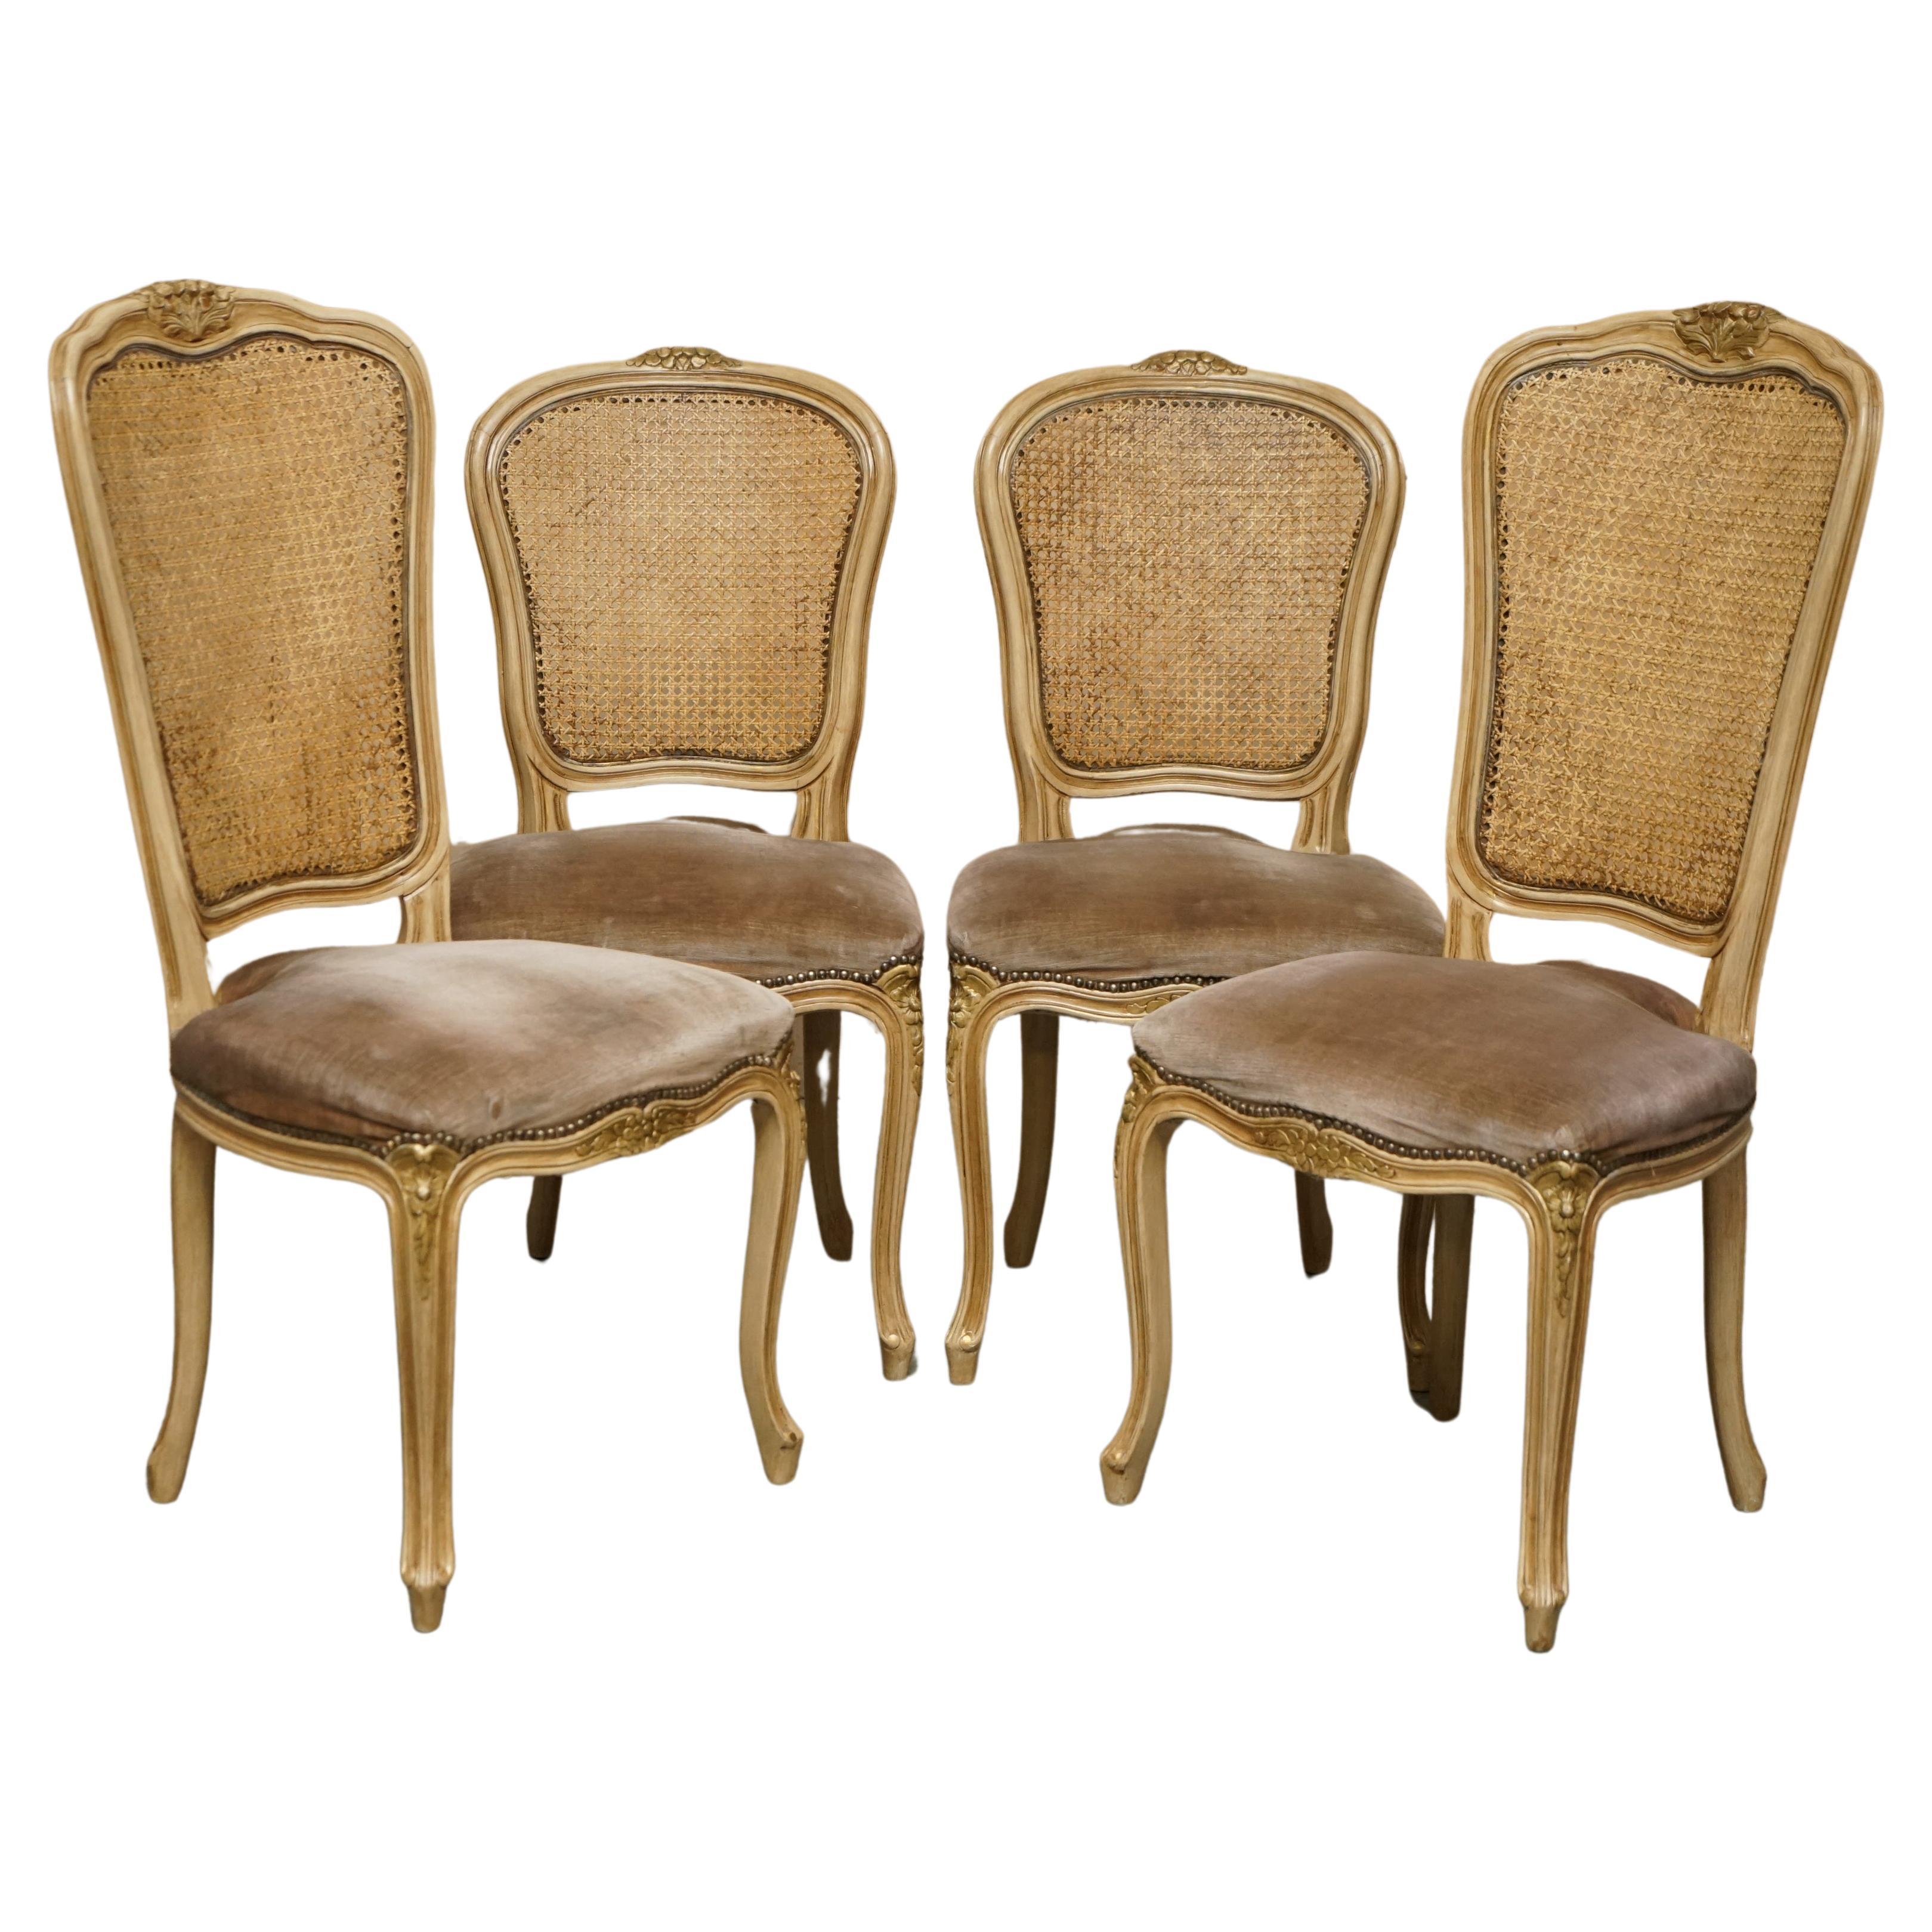 FOUR FINE ANTIQUE FRENCH BERGERE DiNING CHAIRS WITH PERIOD VELOUR UPHOLSTERY For Sale